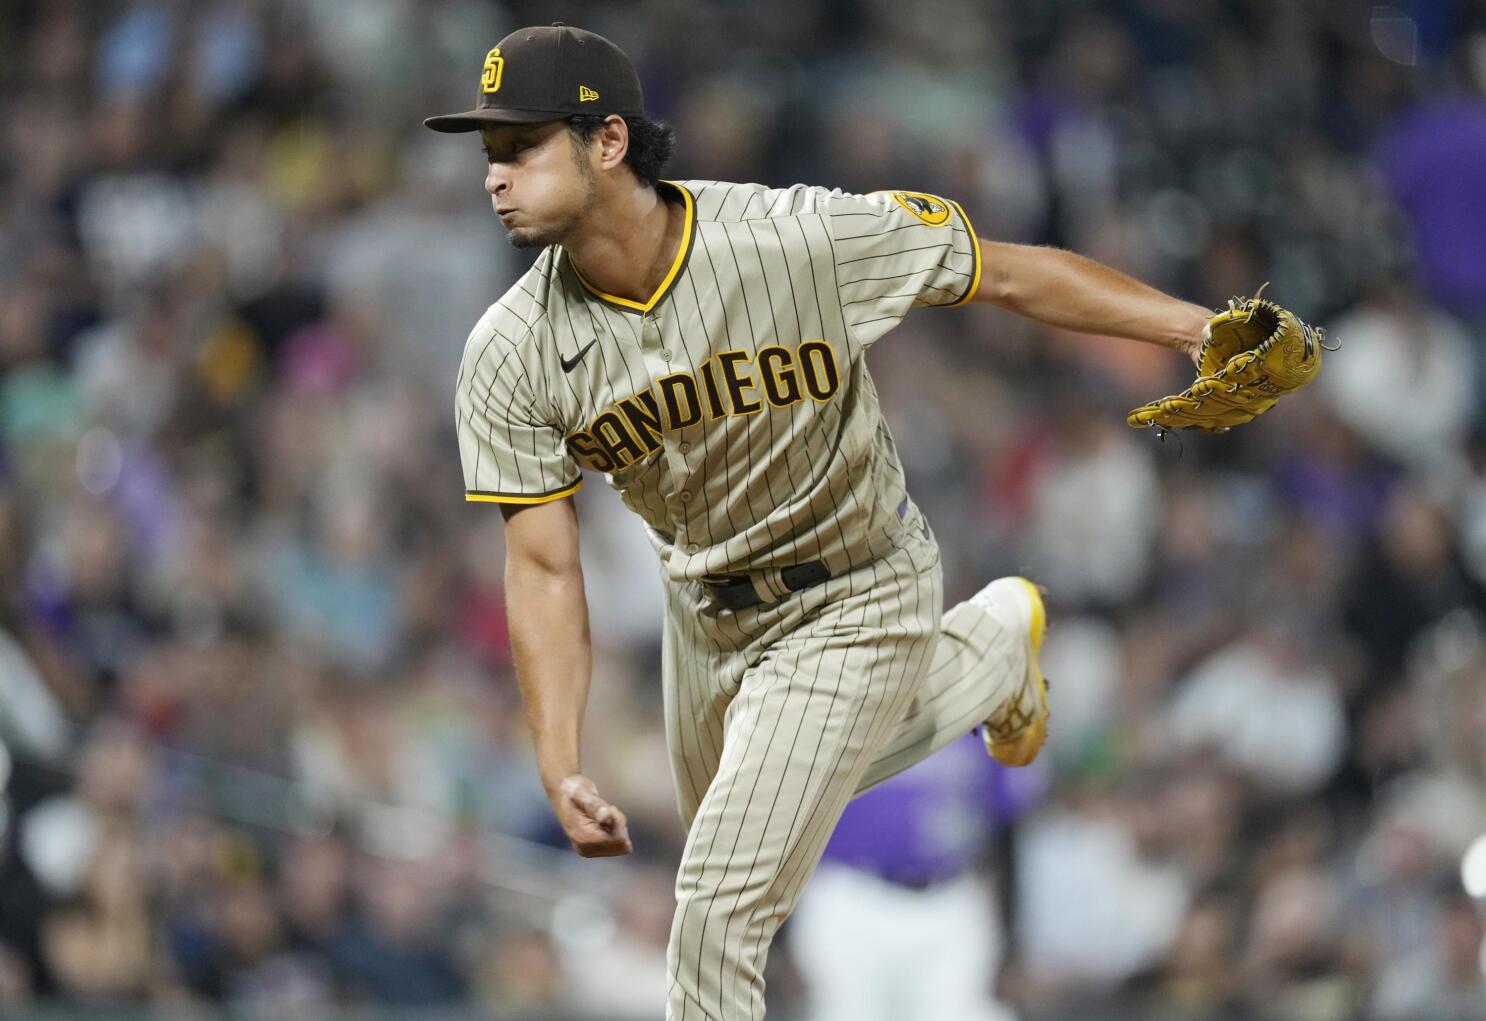 Getting the best of Yu: Can Padres' Darvish find what he's